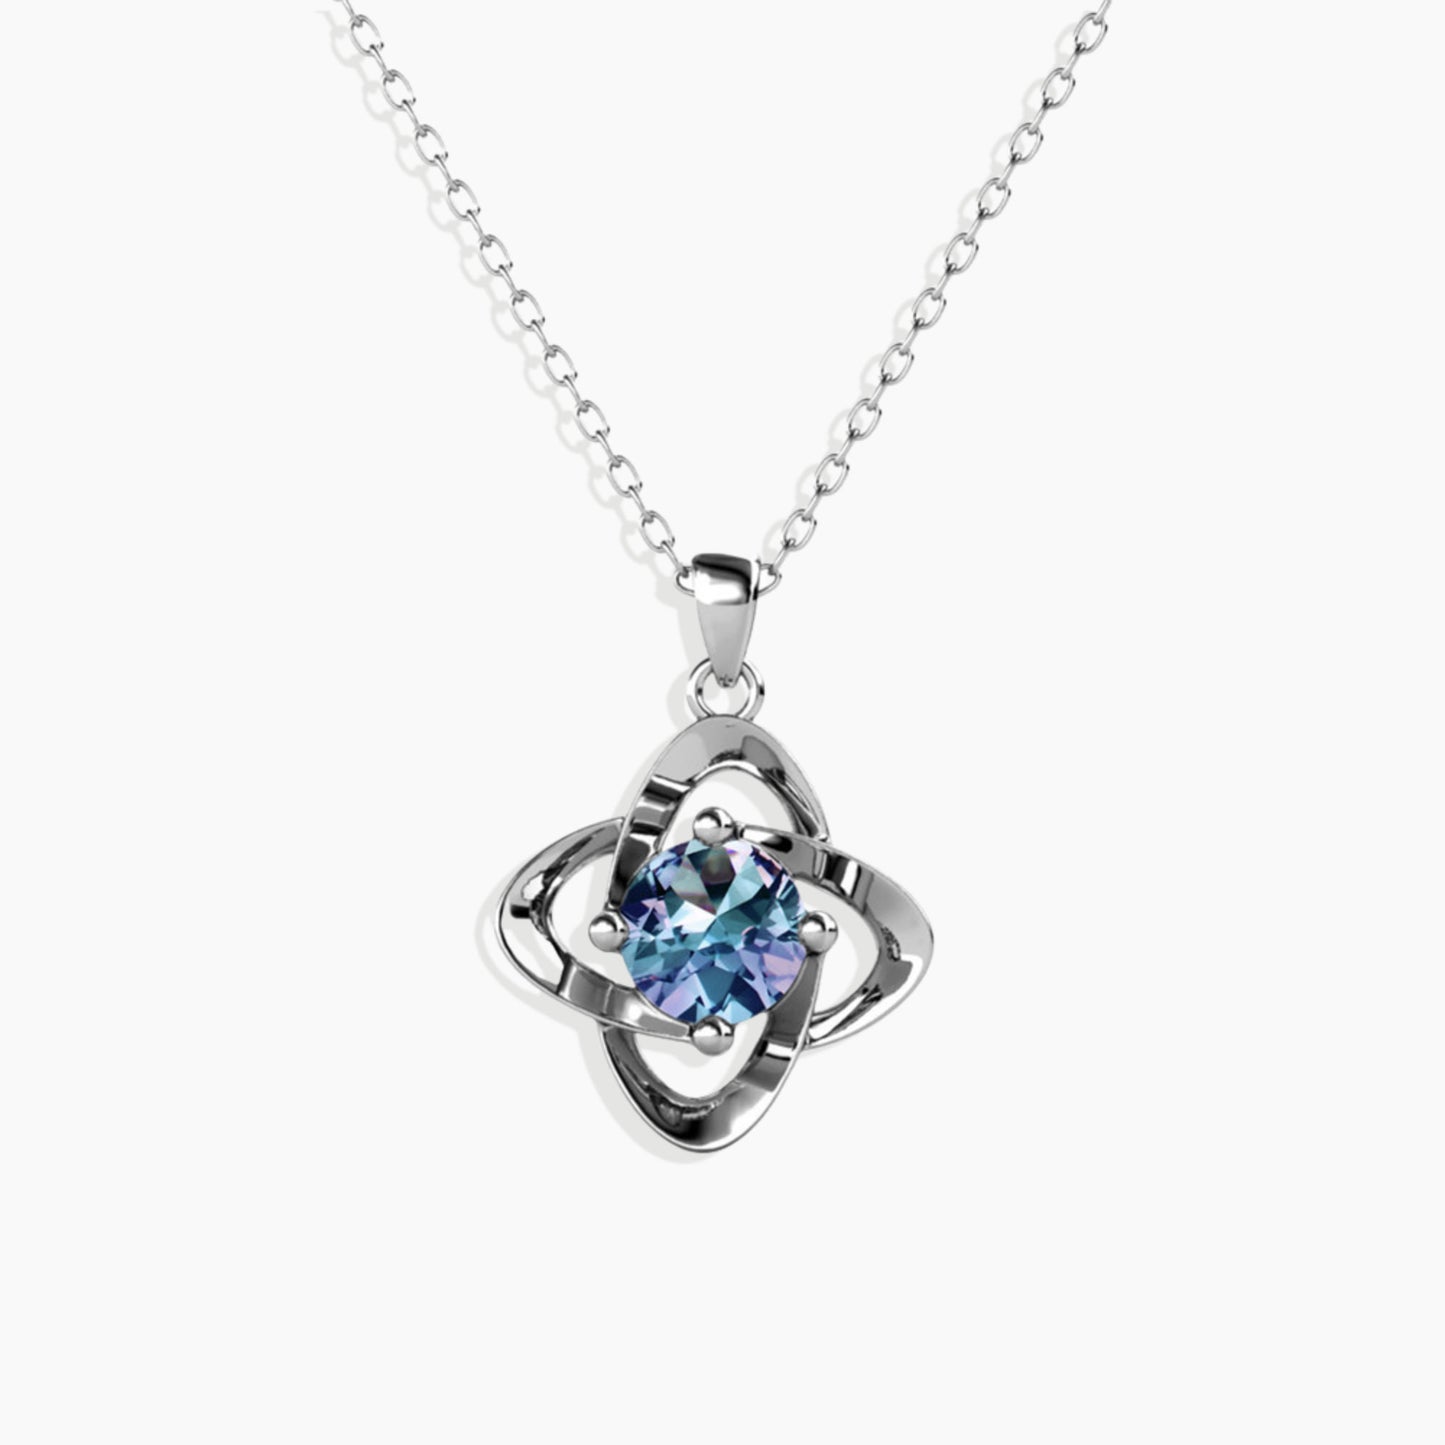 Alexandrite Galaxy Pendant Necklace in Sterling Silver